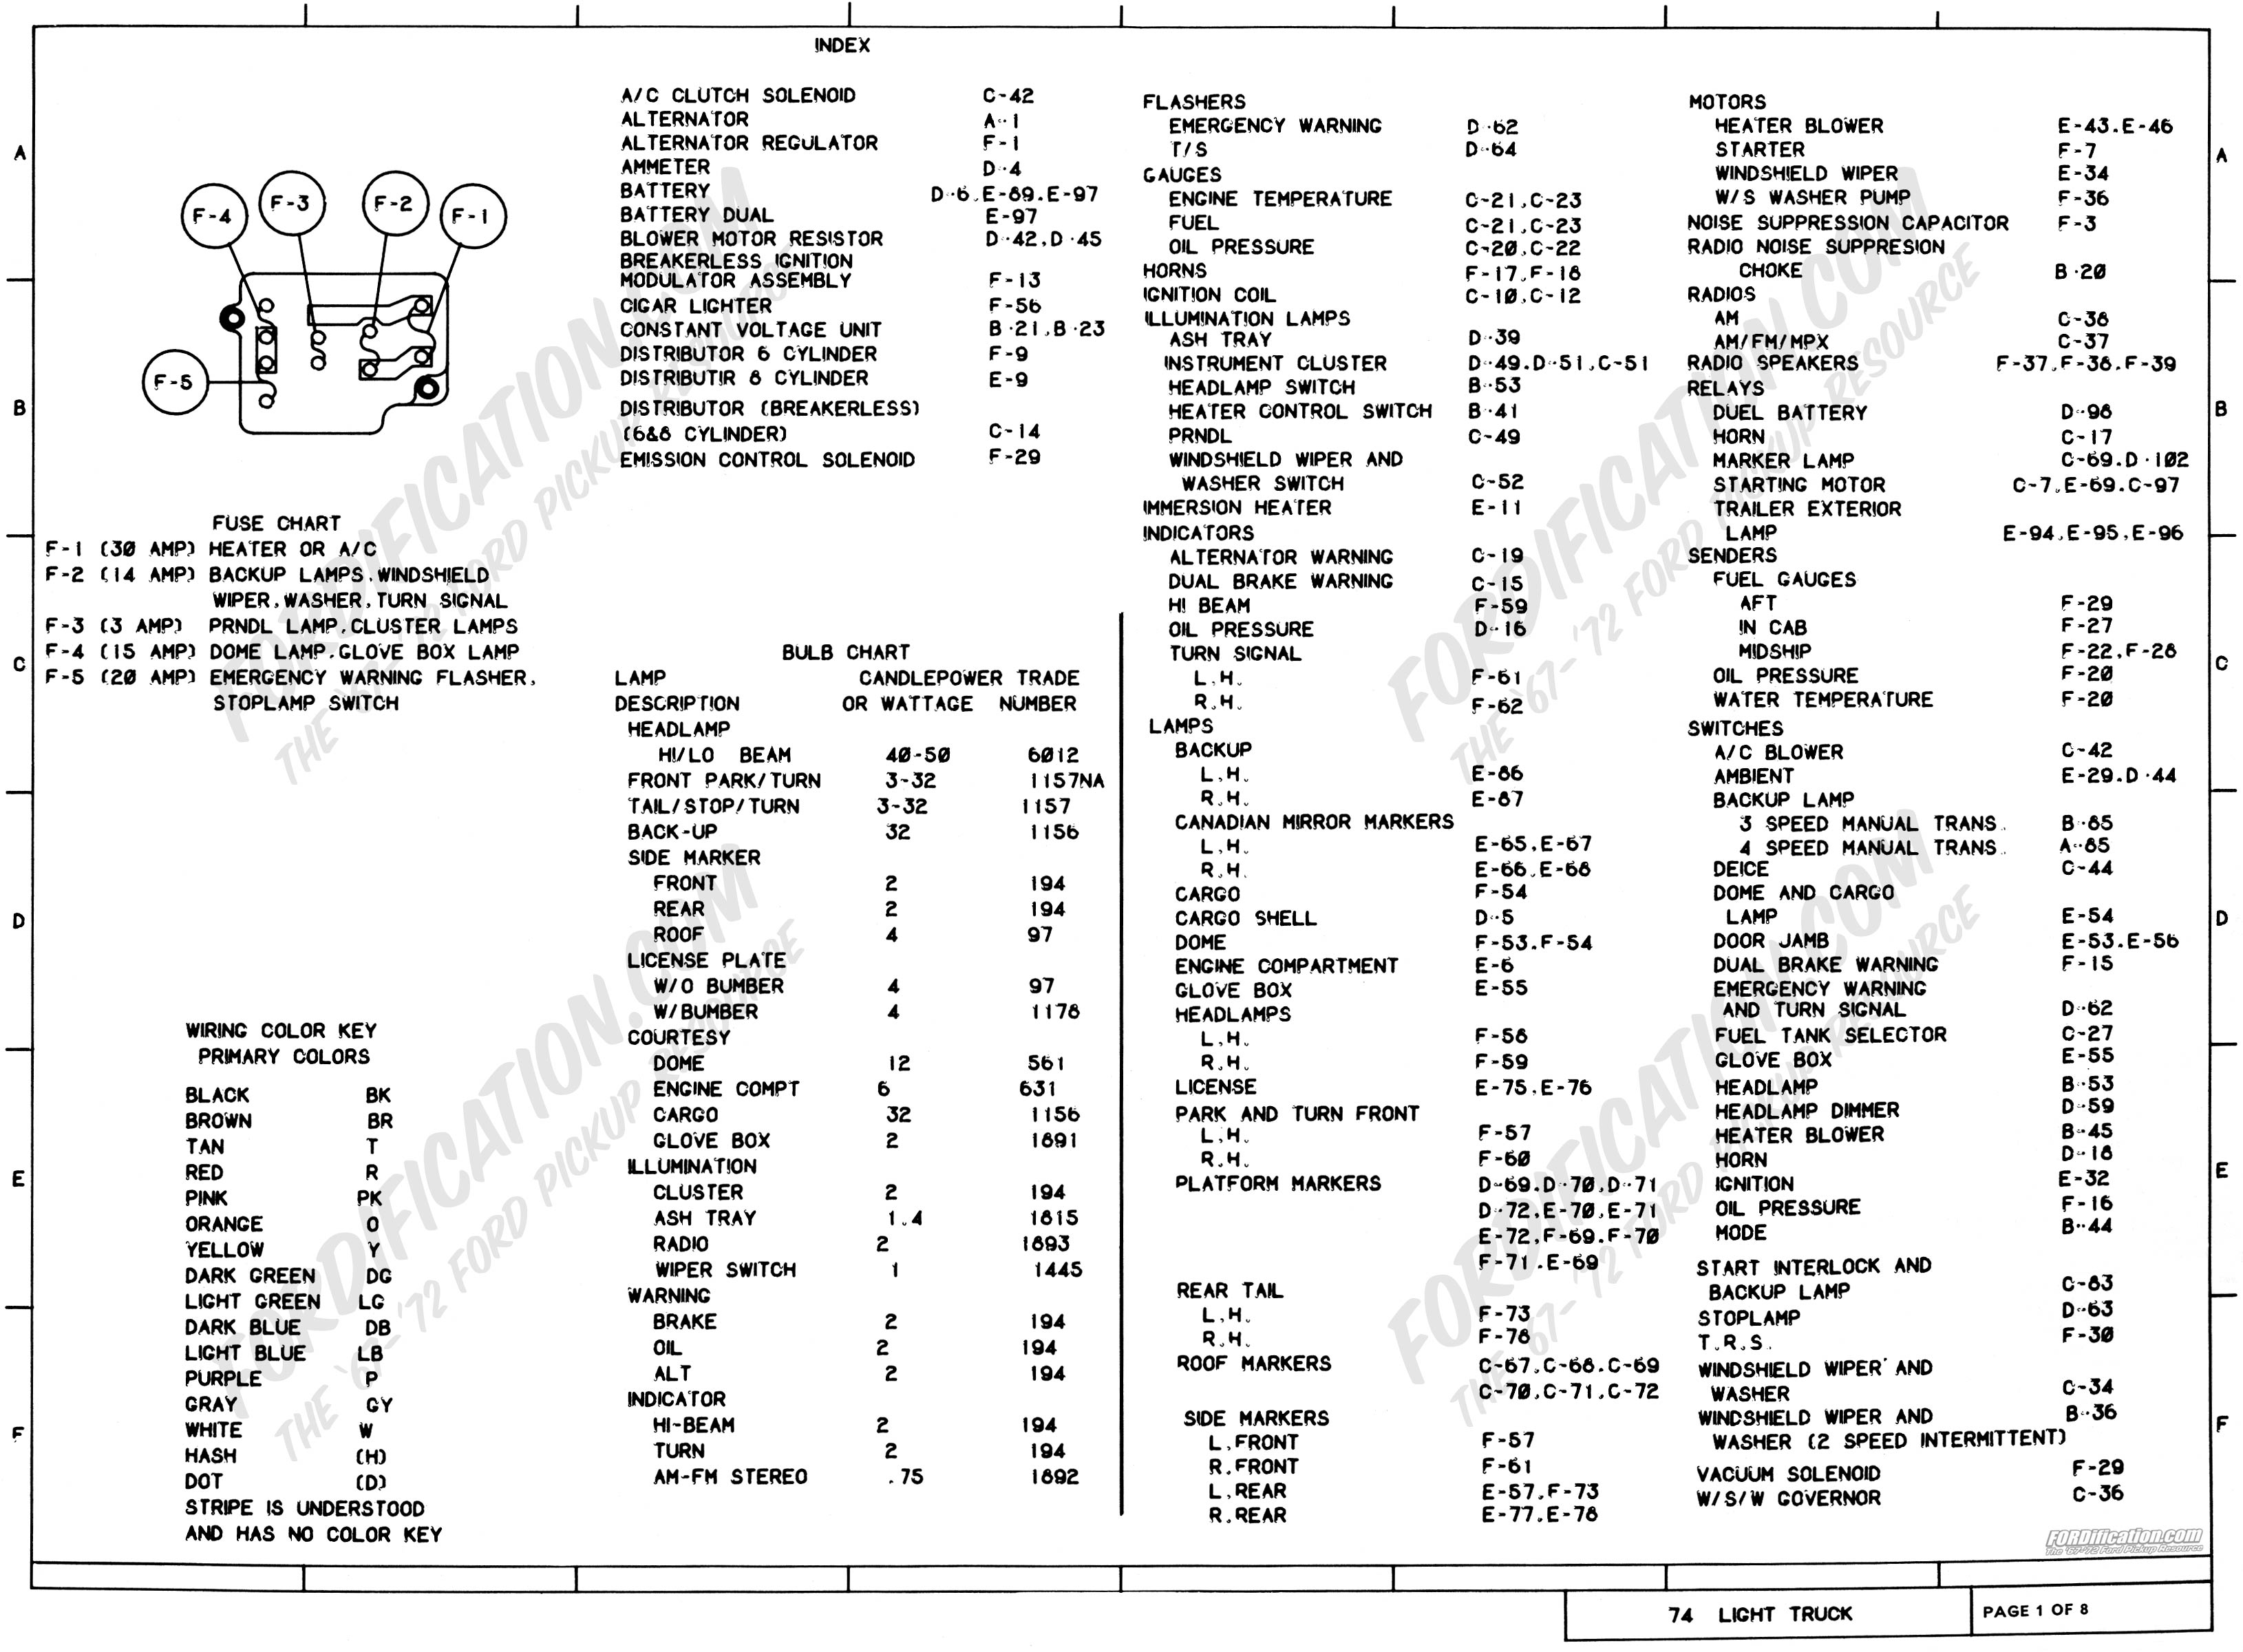 1973 1979 Ford Truck Wiring Diagrams